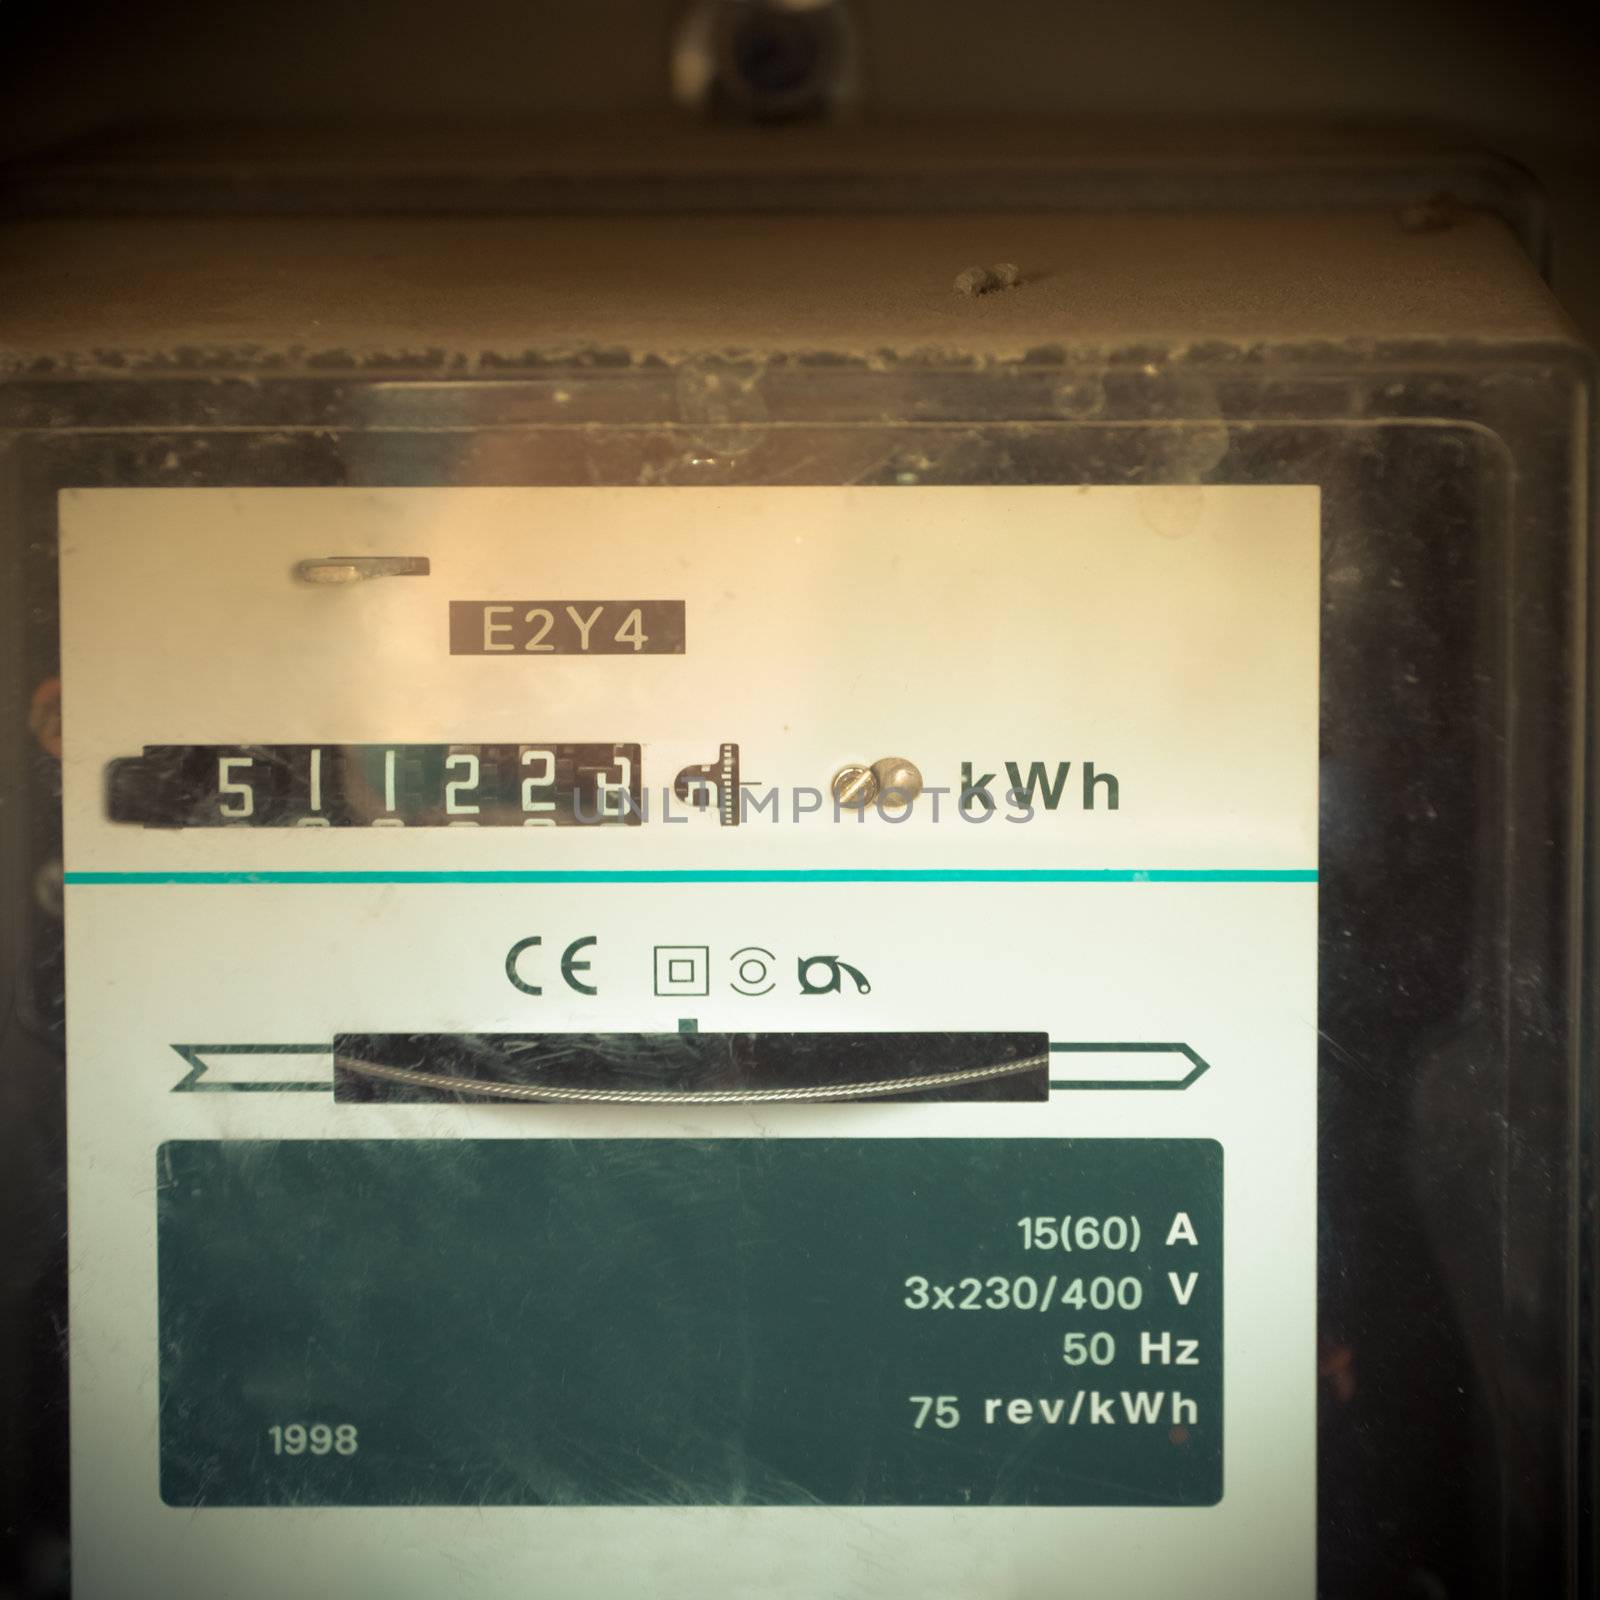 Moble photography lo-fi styled image of old fashioned analog residential power supply meter